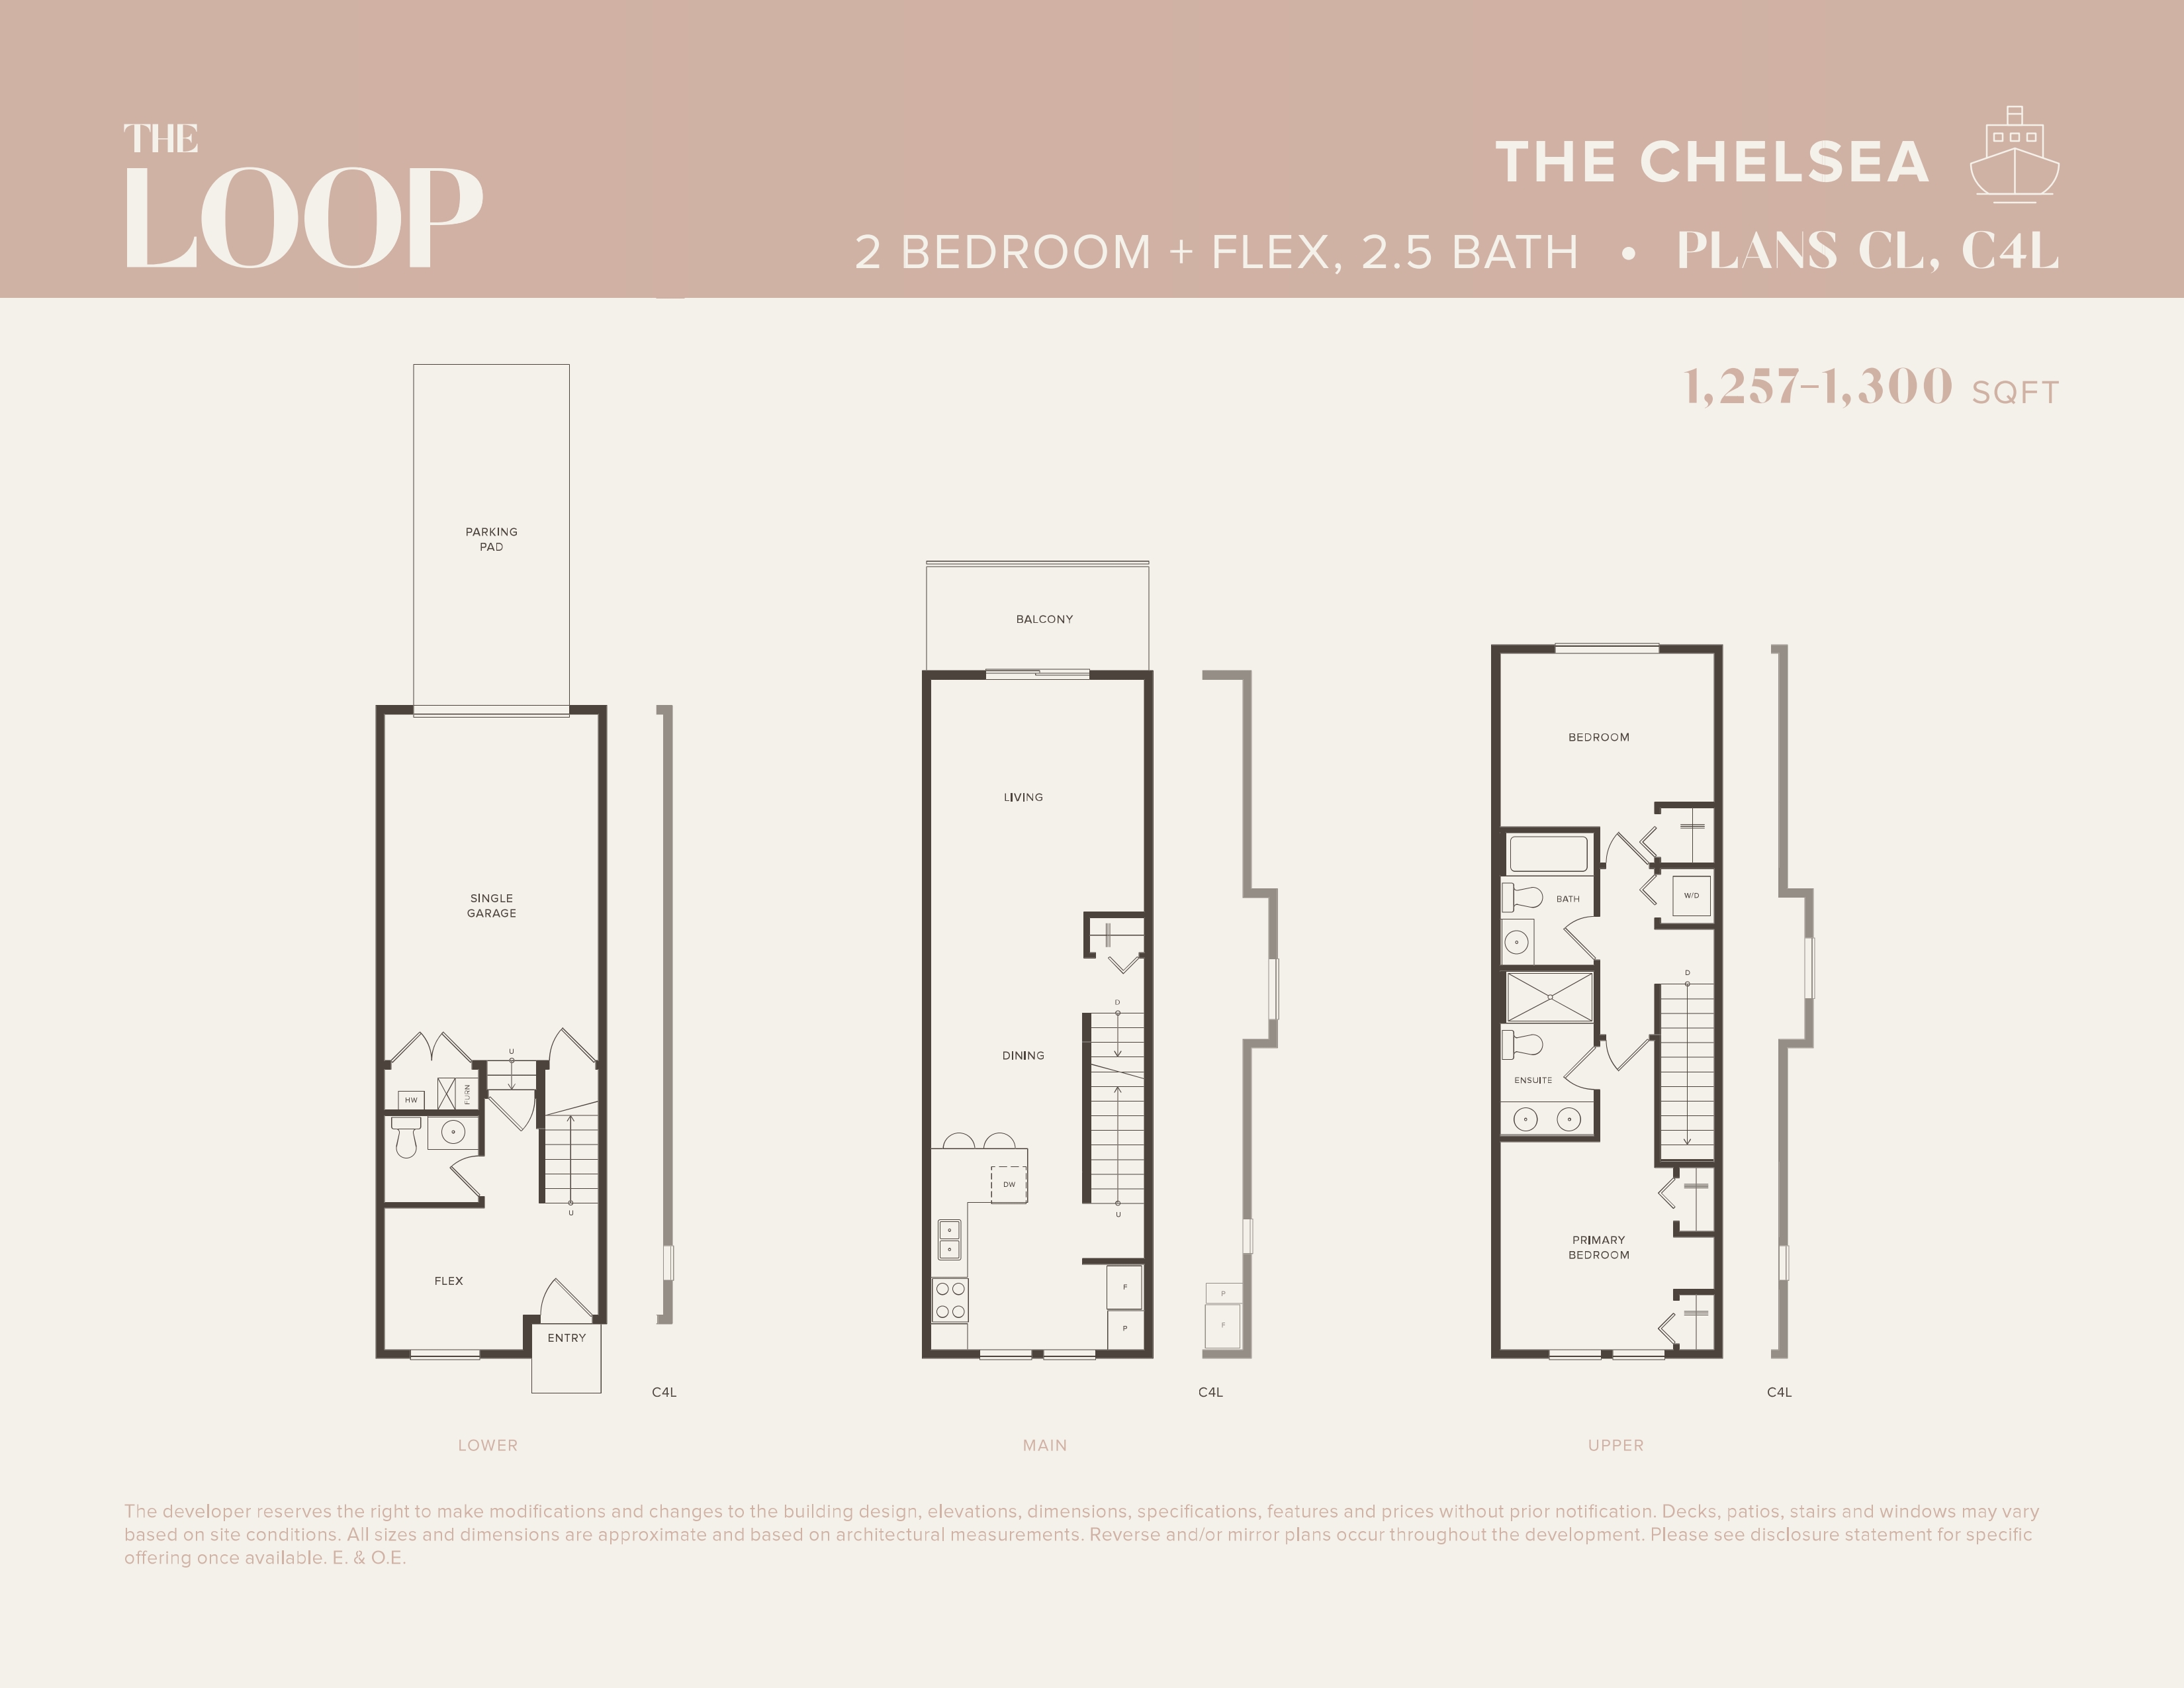  The Chelsea  Floor Plan of The Loop Towns with undefined beds